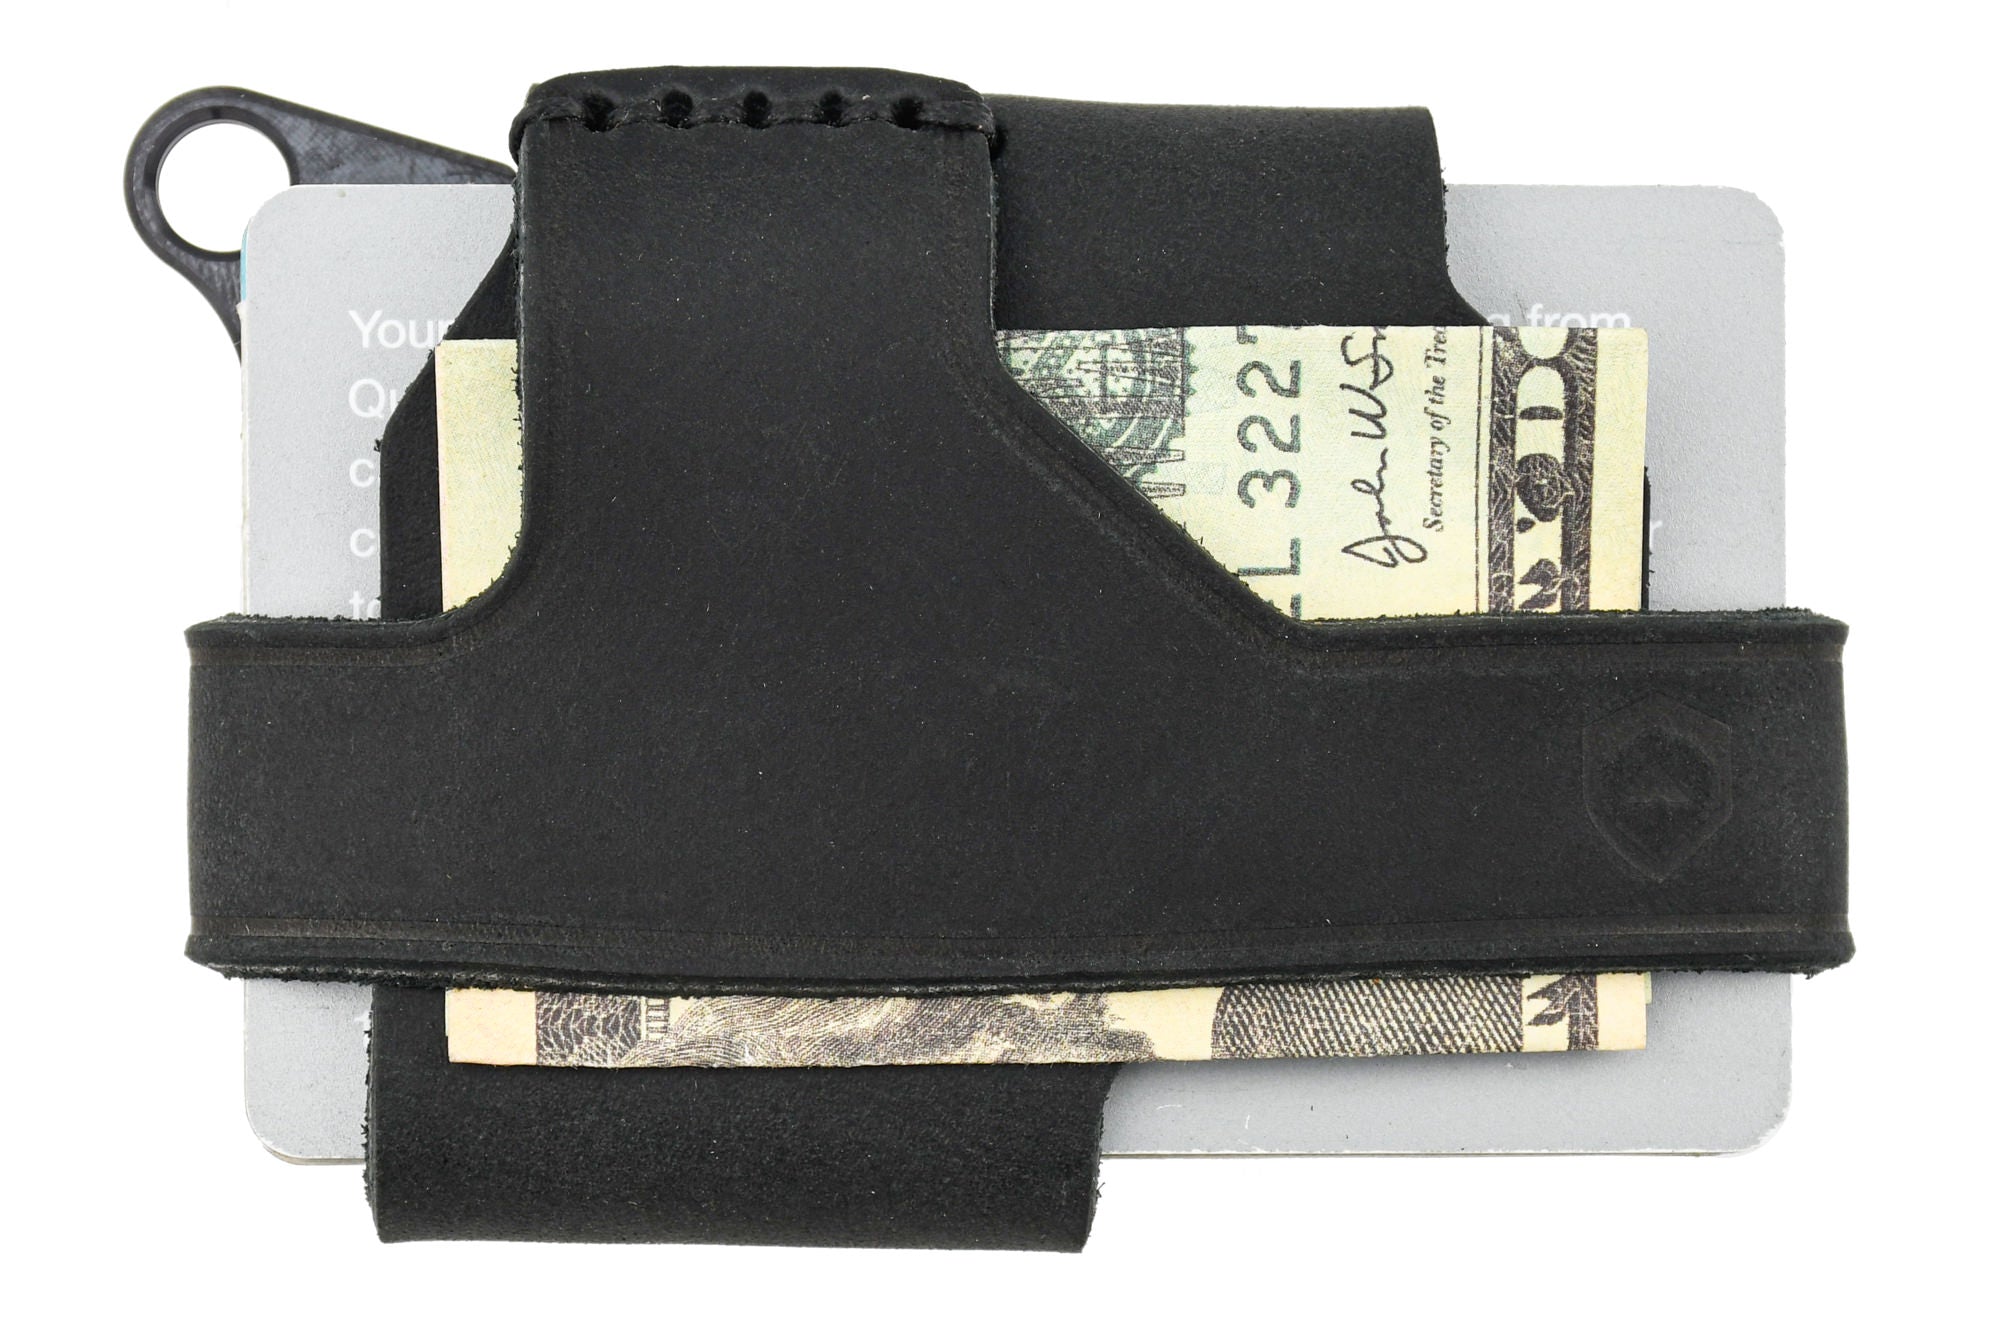 Simple Card Wallet with Money Clip - Bexar Goods Co.